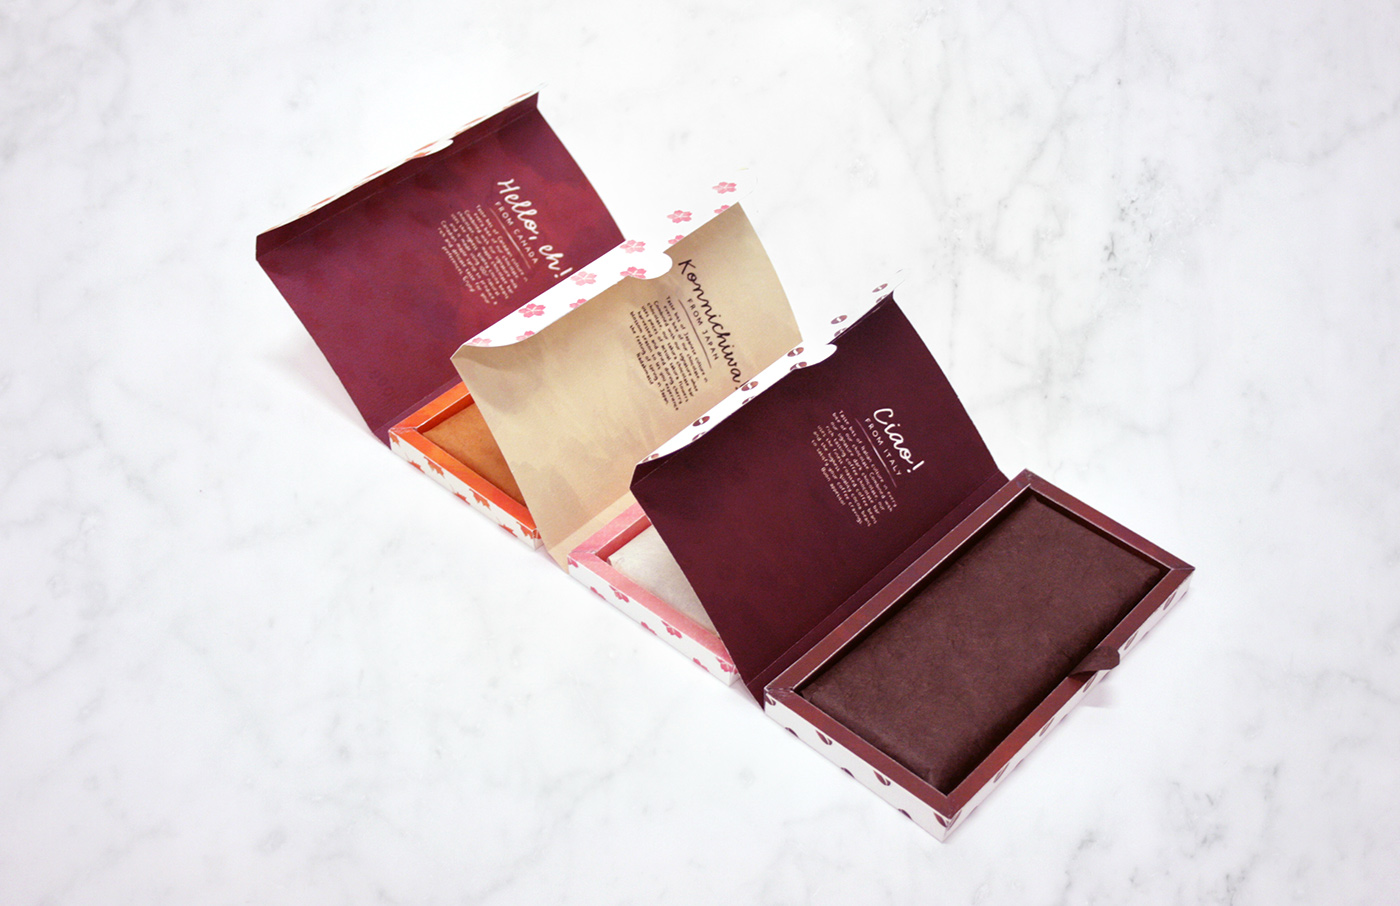 chocolate Packaging bars culture world japan Canada Italy Coffee adobeawards